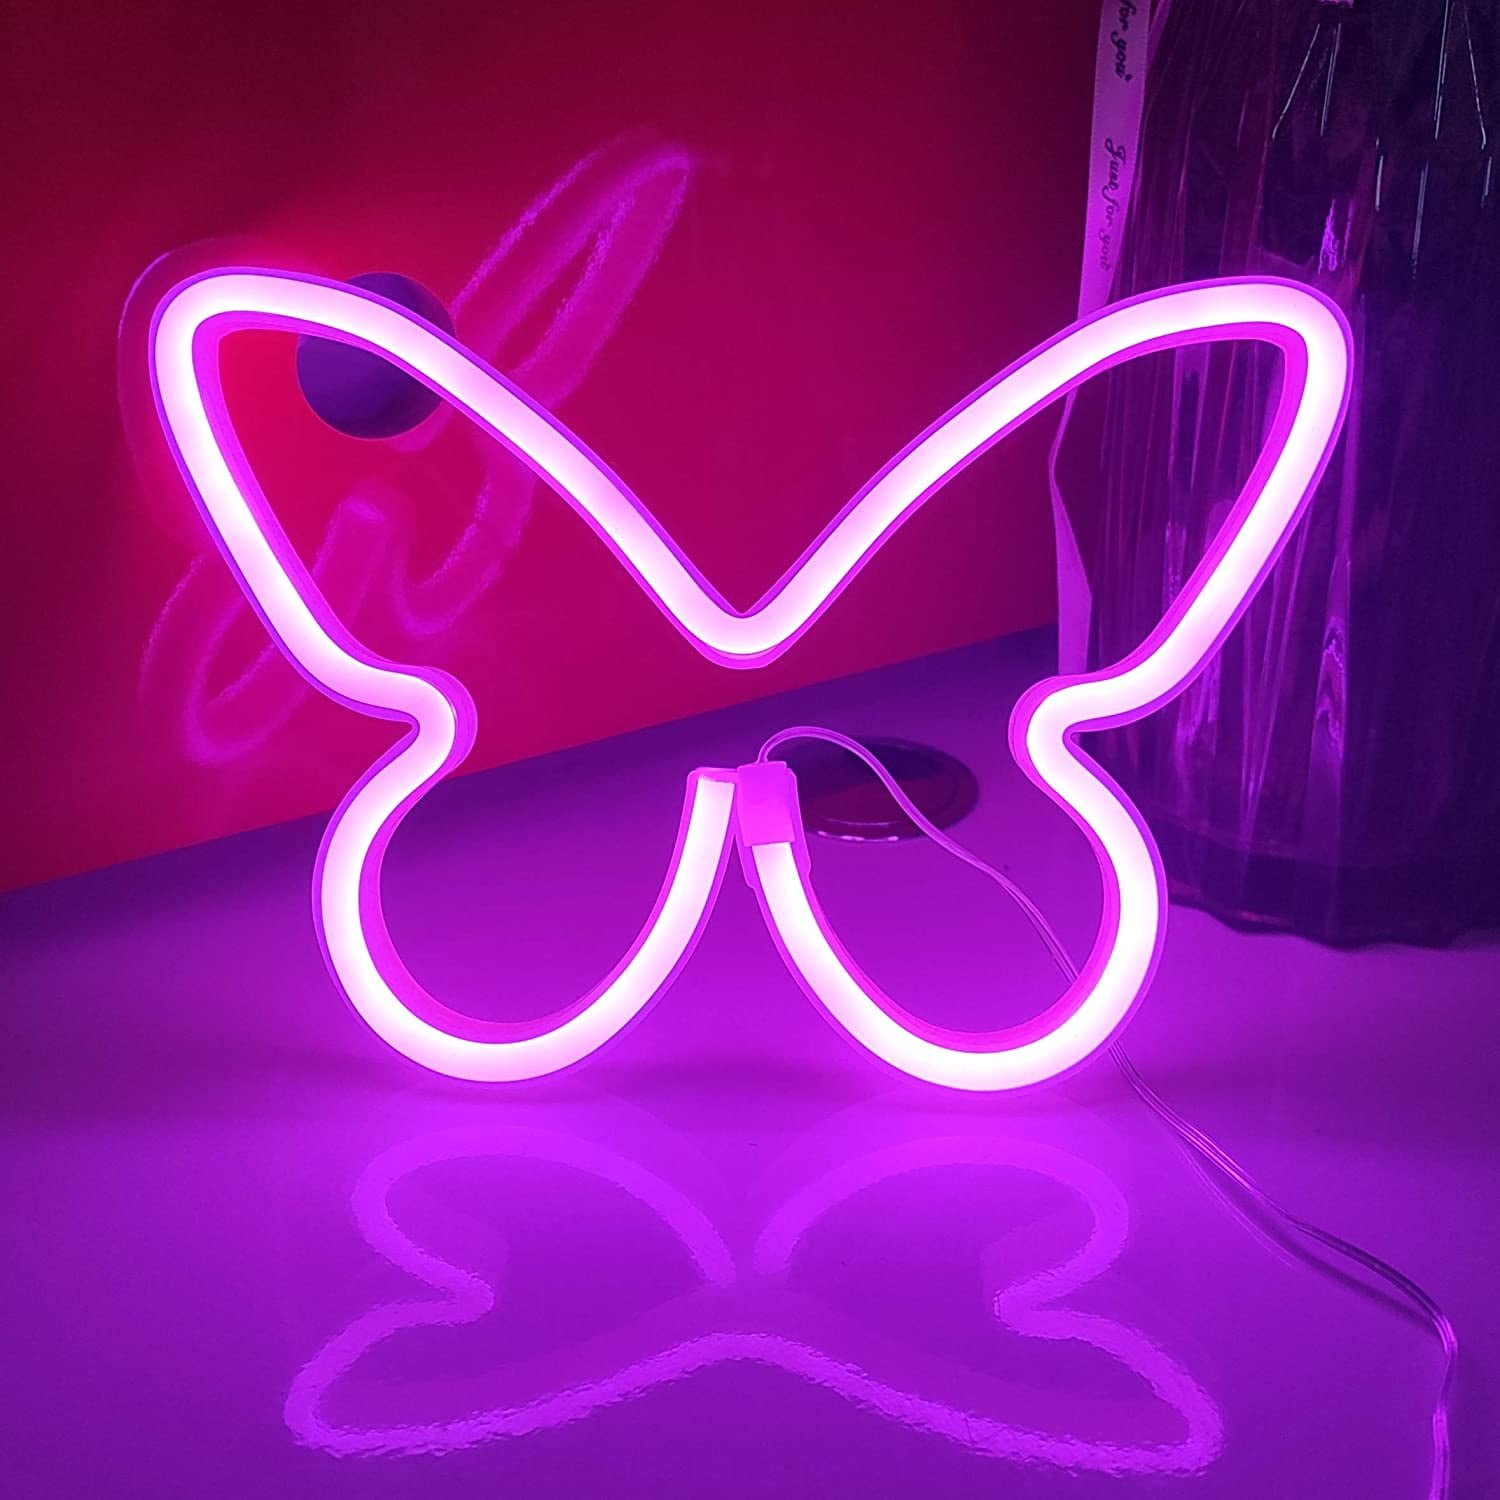 Erfly Neon Signs Battery Powered Lights For Wall Decor Pink Led Ligh Sign Light Up Bedroom Living Room Kids Birthday Party Com - Neon Light Up Wall Decor